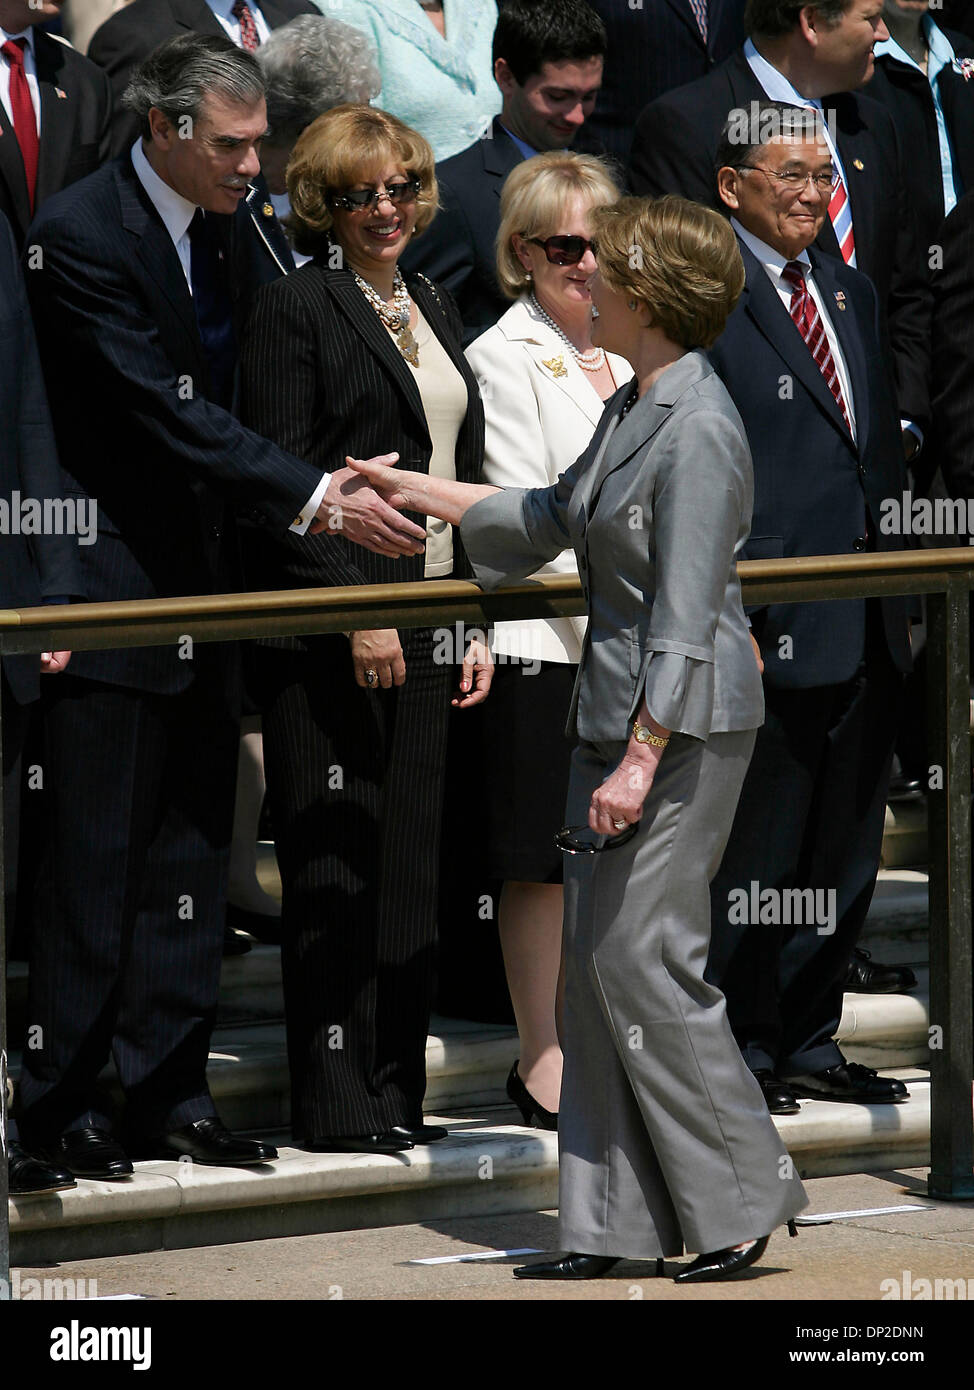 May 29, 2006; Arlington, VA, USA; First Lady, LAURA BUSH attends the wreath laying ceremony at the Tomb of the Unknown Solider in Arlington Cemetery in honor of Memorial Day. Mandatory Credit: Photo by James Berglie/ZUMA Press. (©) Copyright 2006 by James Berglie Stock Photo